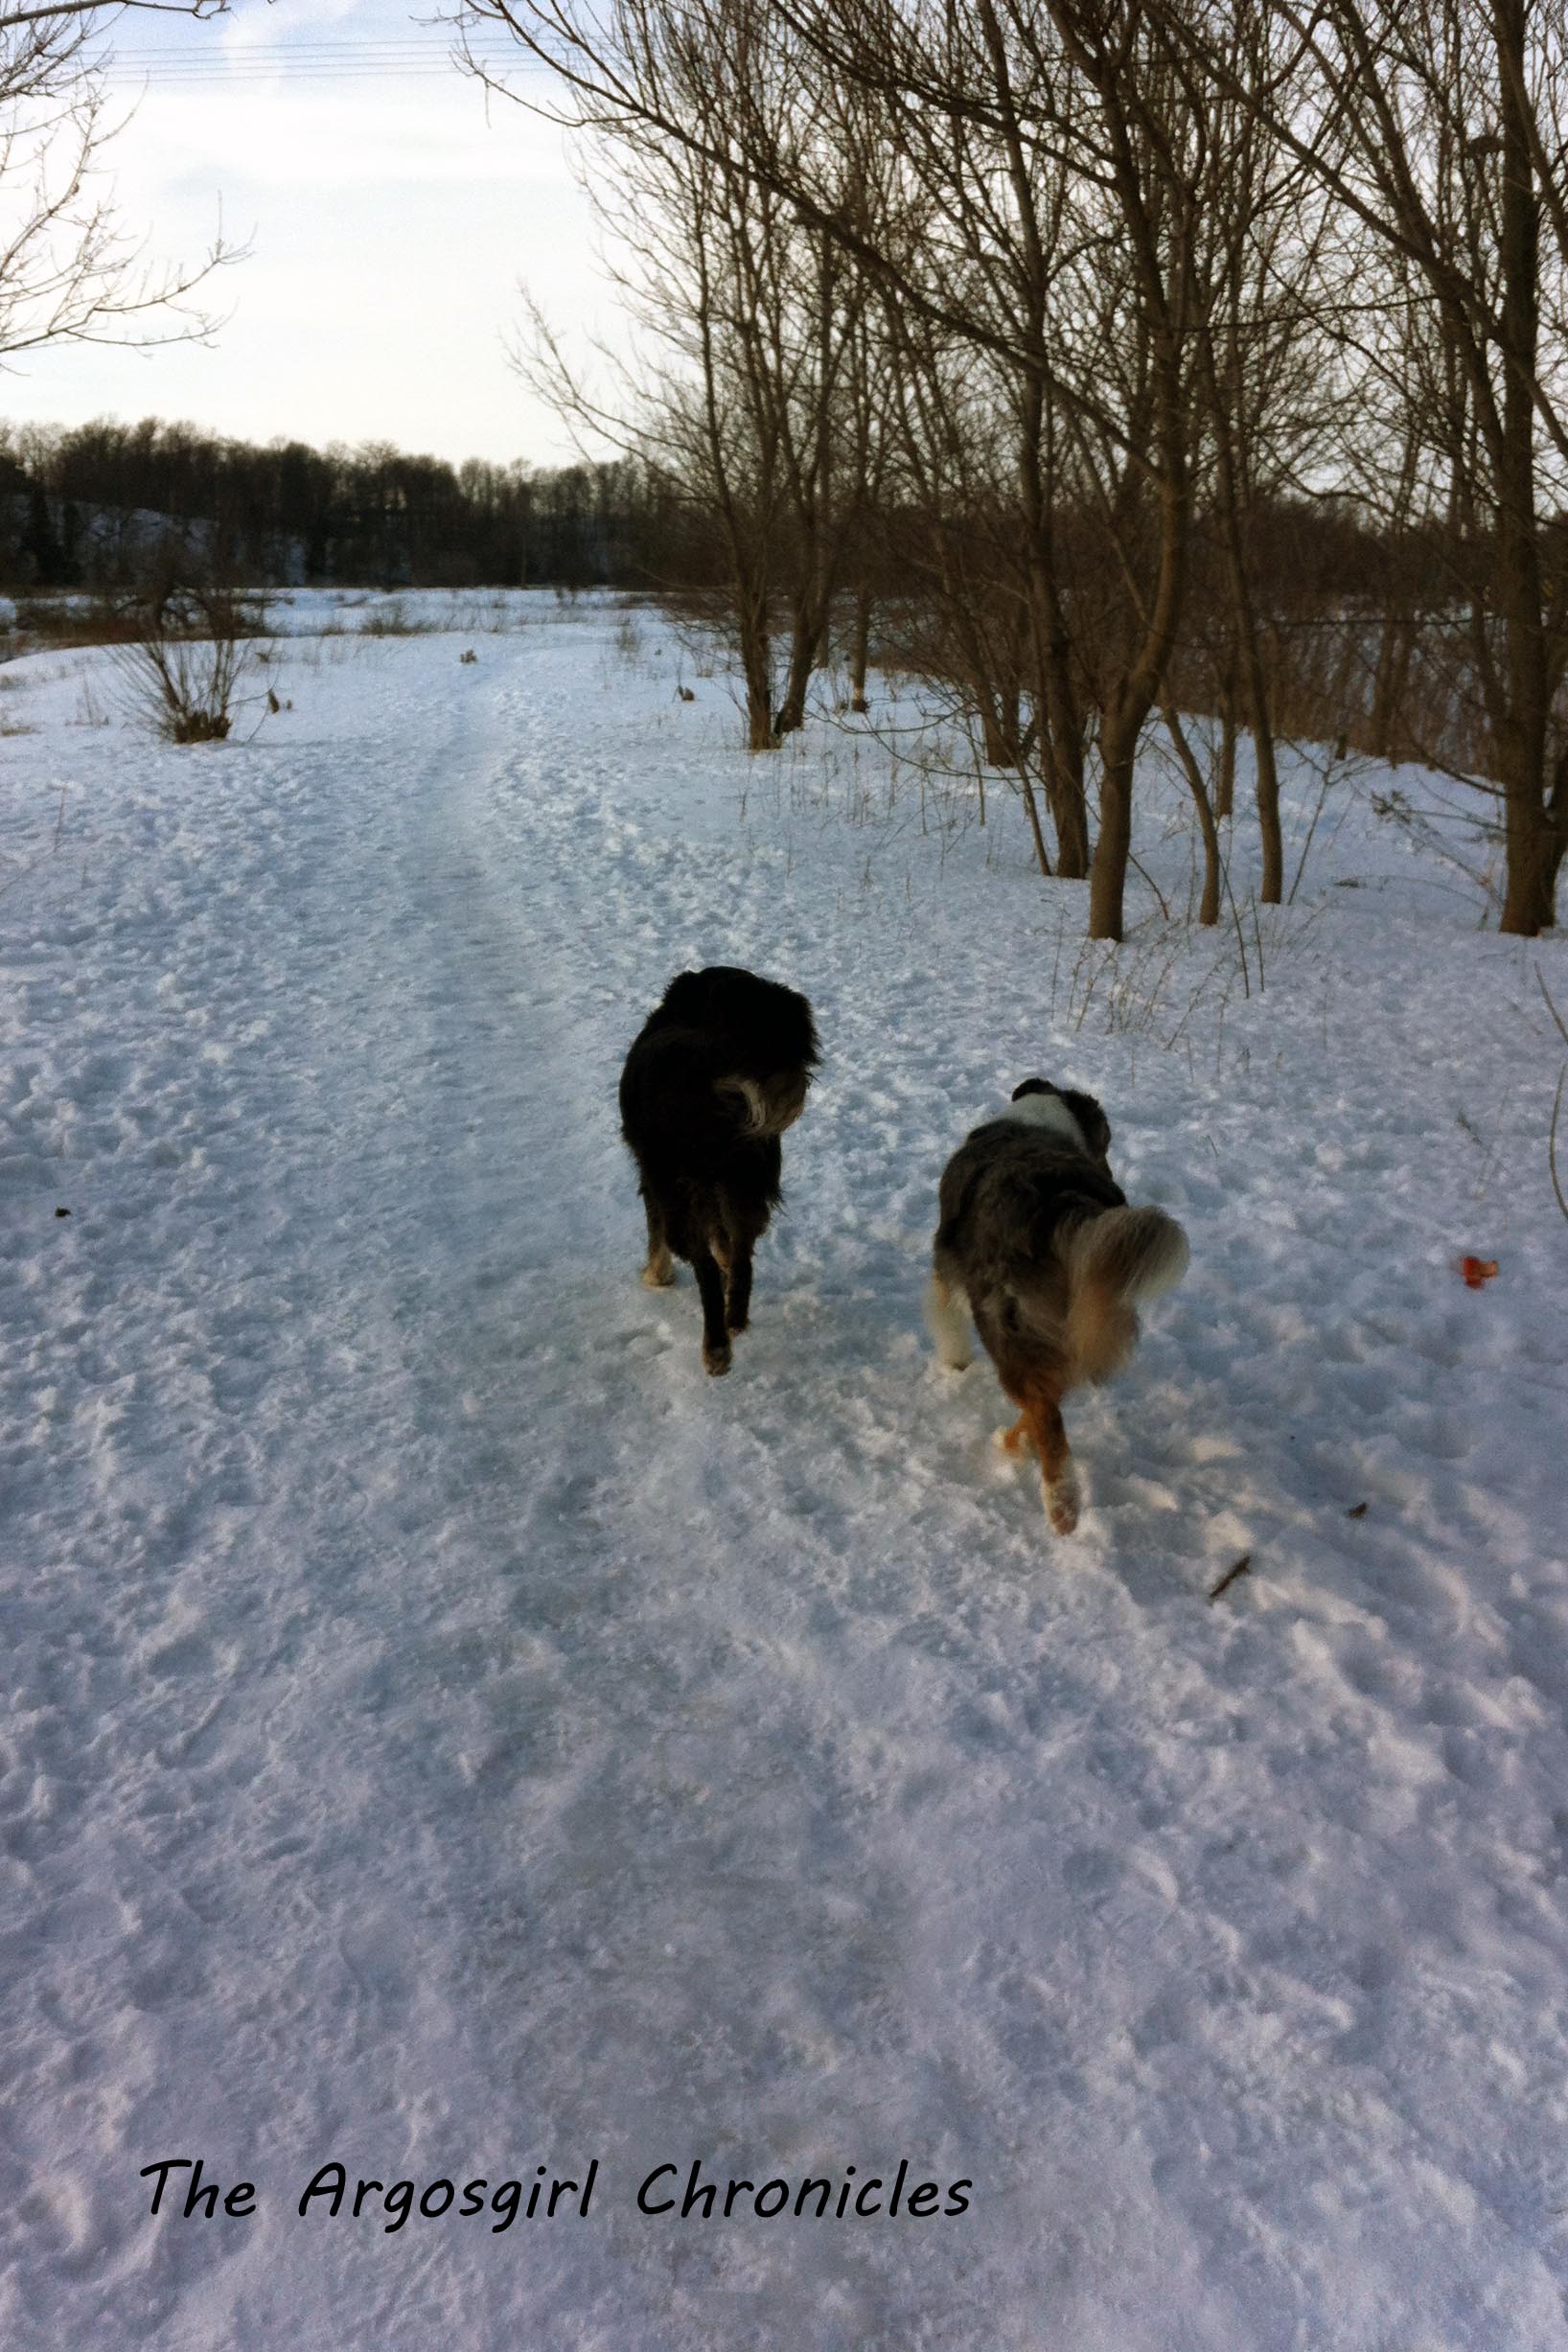 Best buds enjoying the trail (one of the few moments when Molly was on the trail).